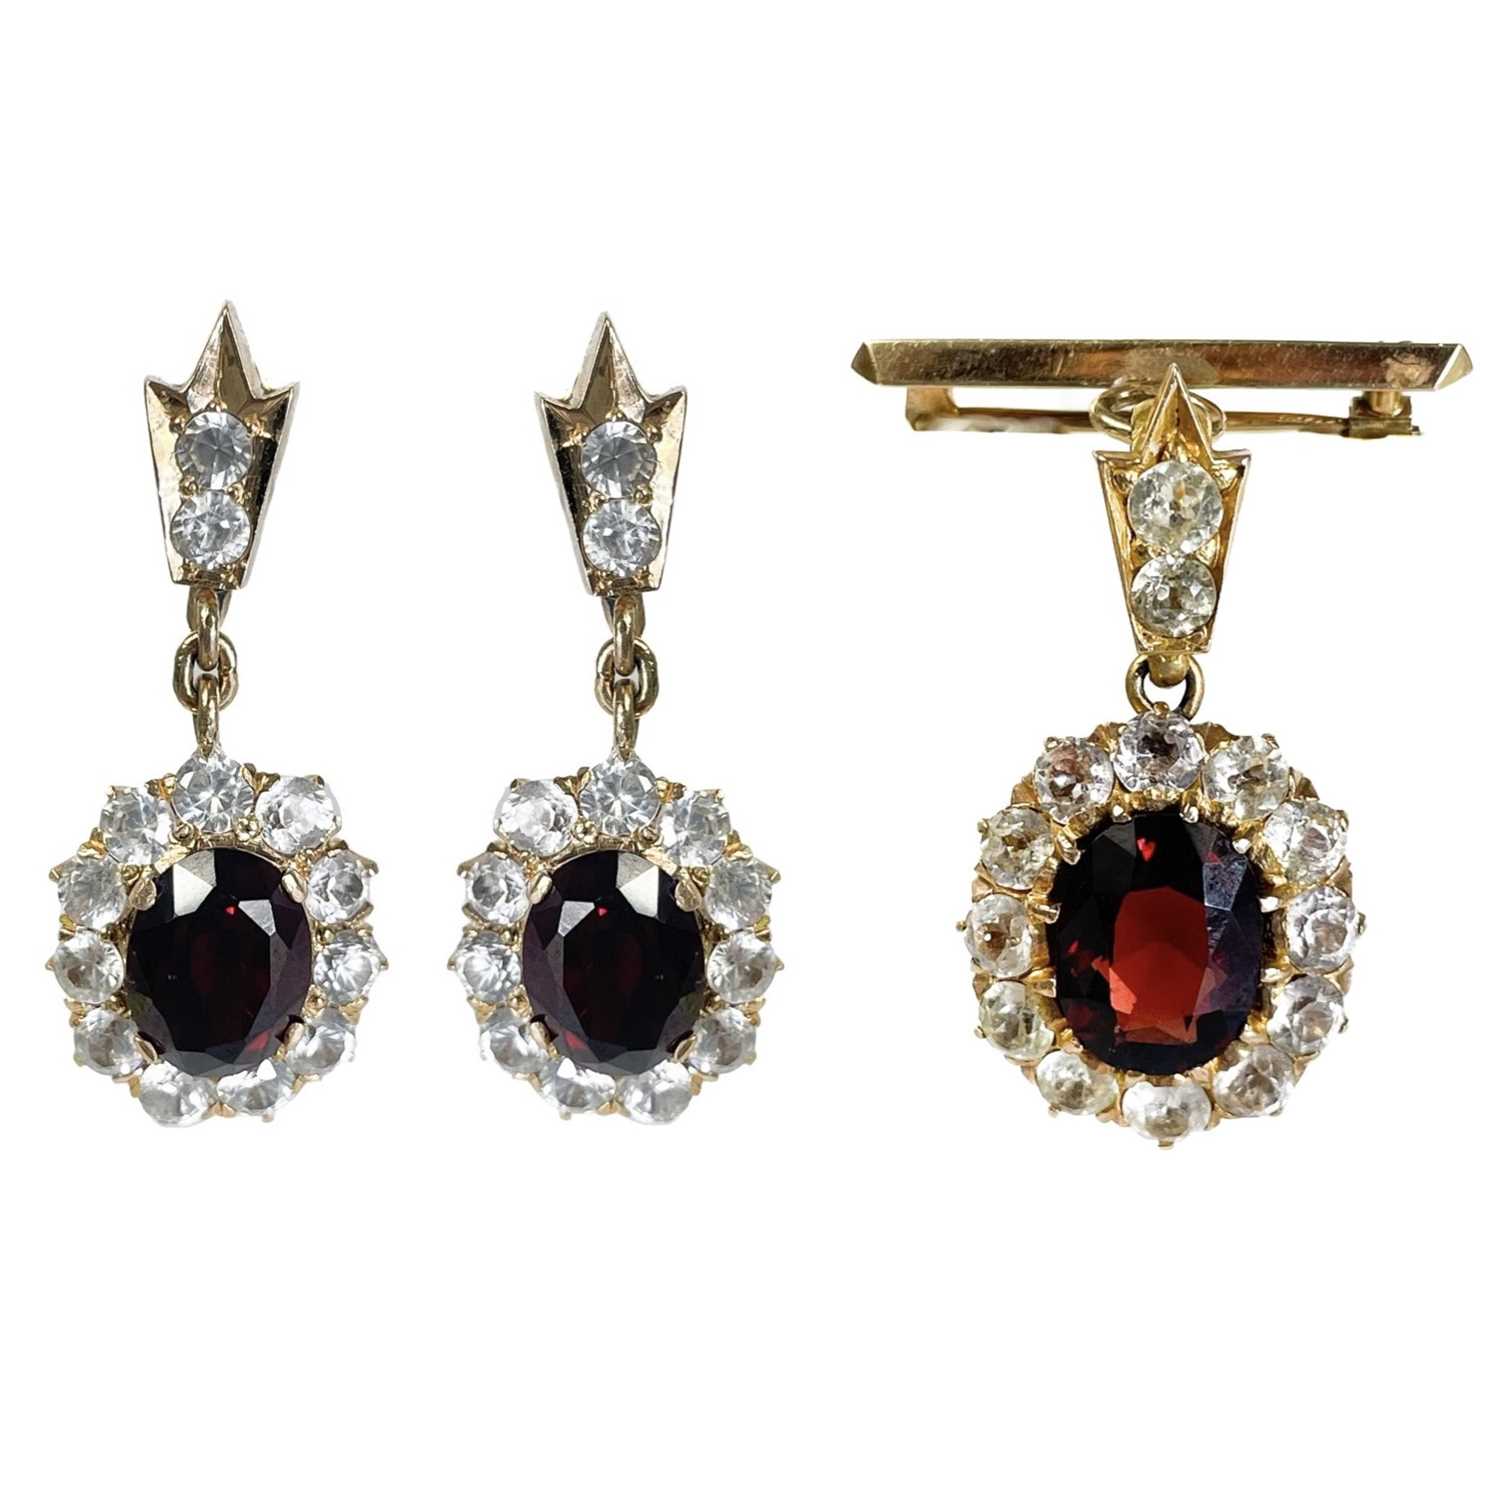 An attractive 14ct gold (tested) white sapphire and garnet cluster demi-parure.